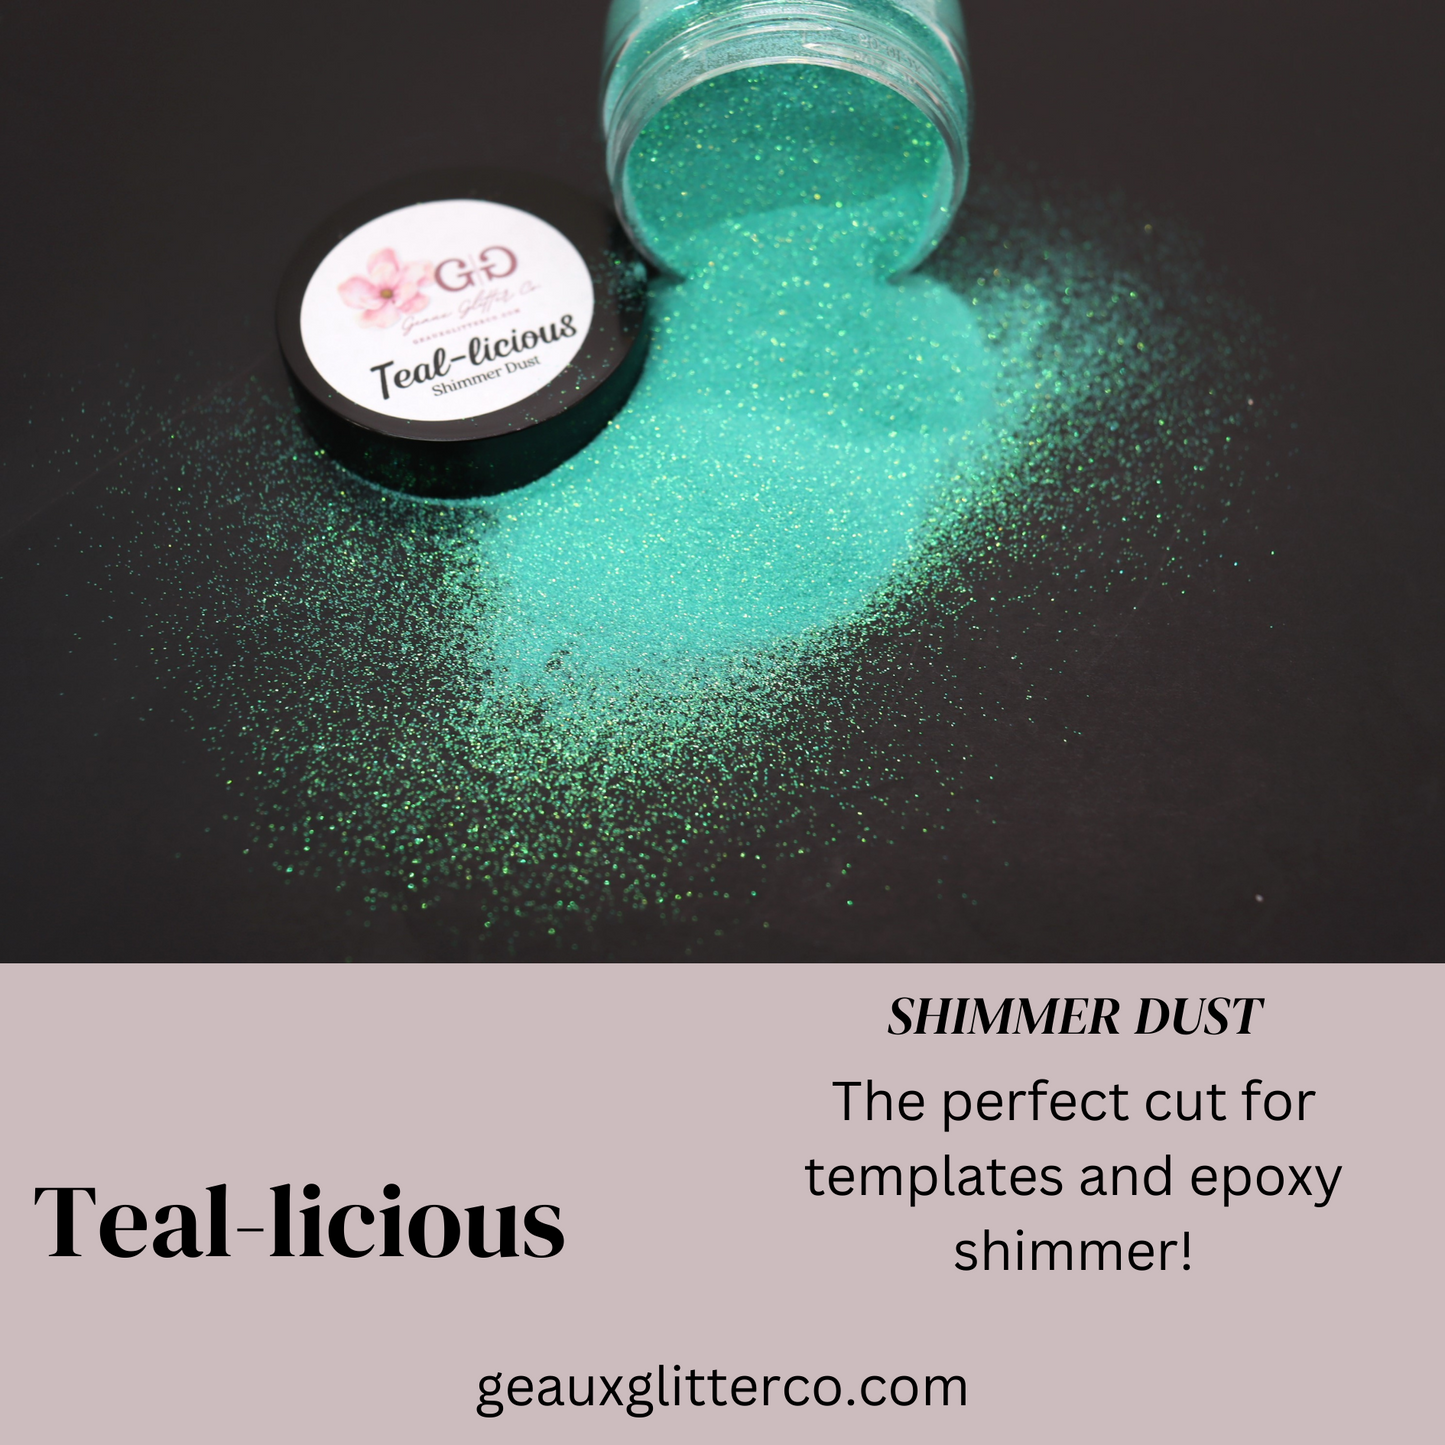 Teal-licious Shimmer Dust